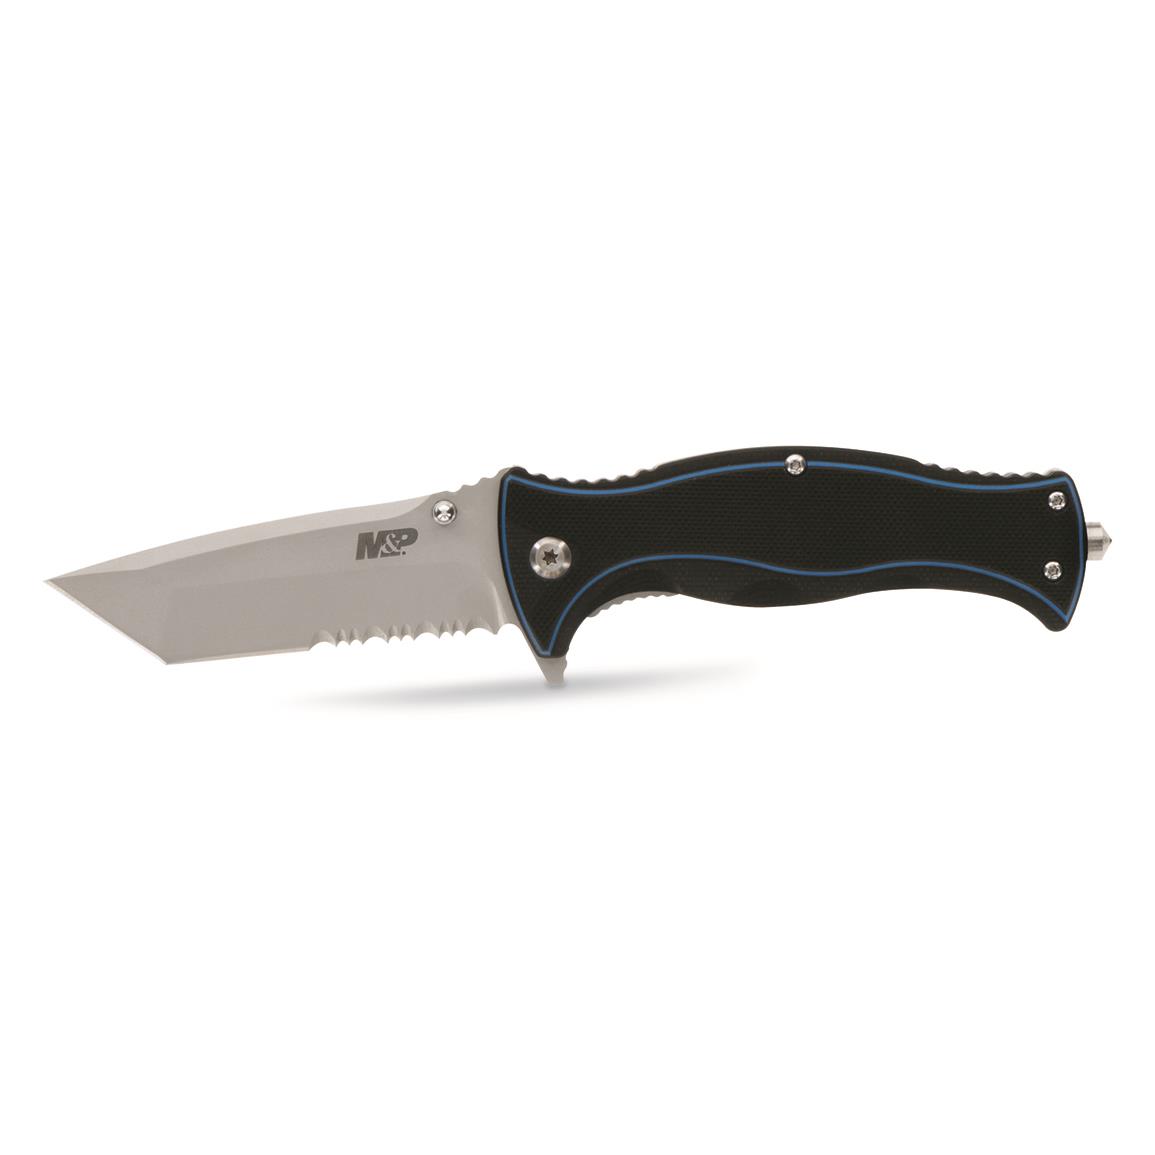 Smith & Wesson M&P Officers Folding Knife - $16.99